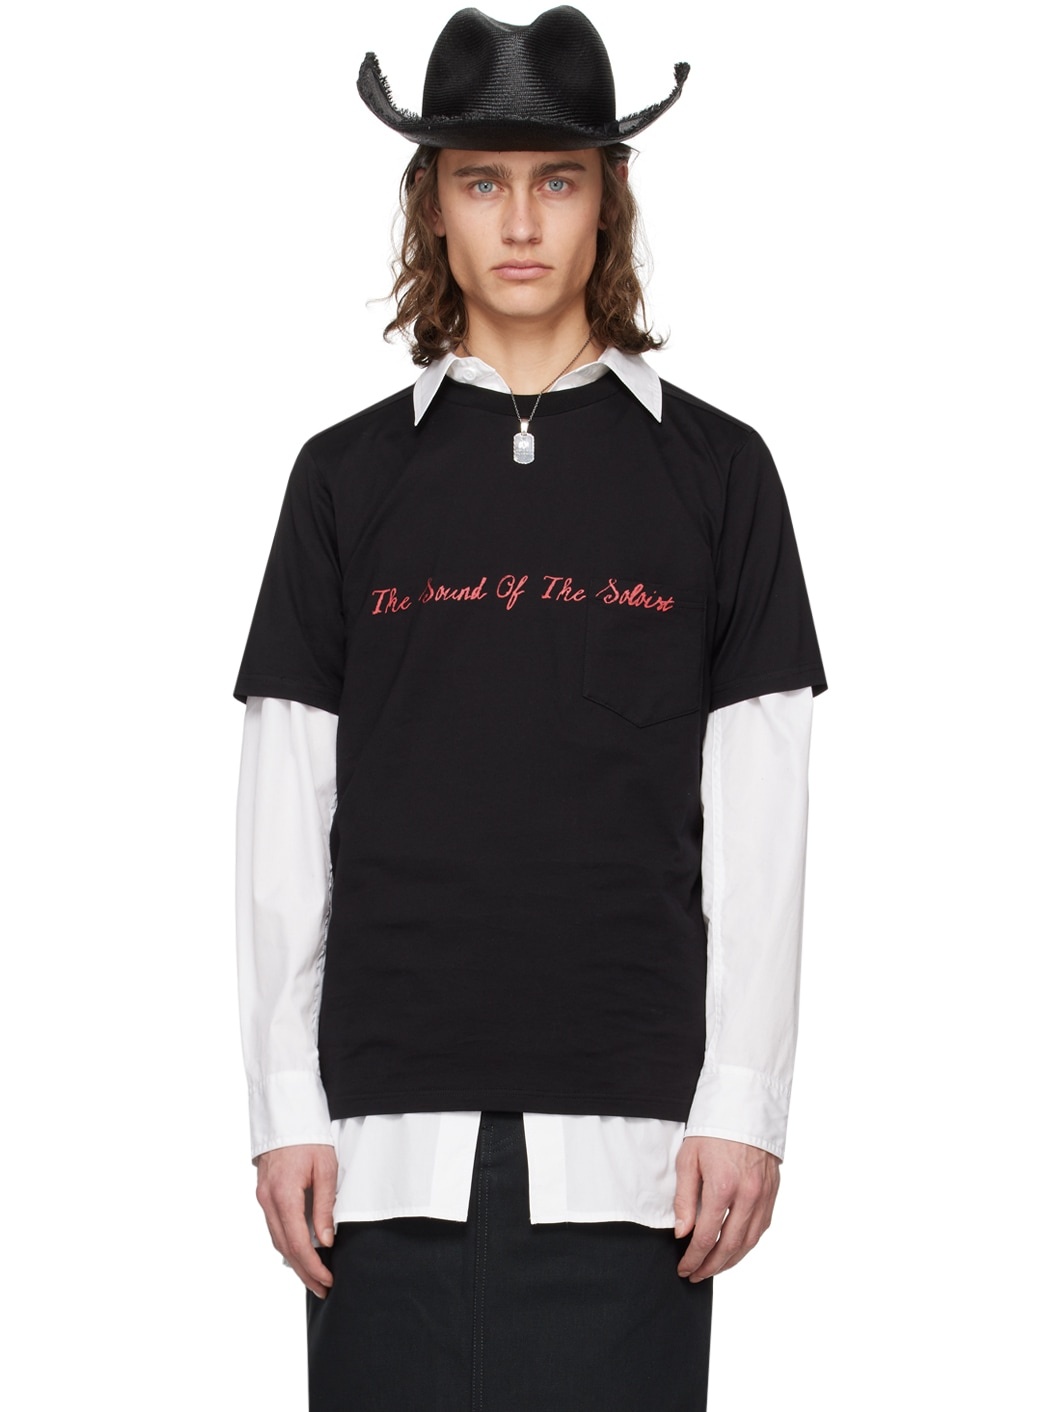 Black 'The Sound Of The Soloist' T-Shirt - 1